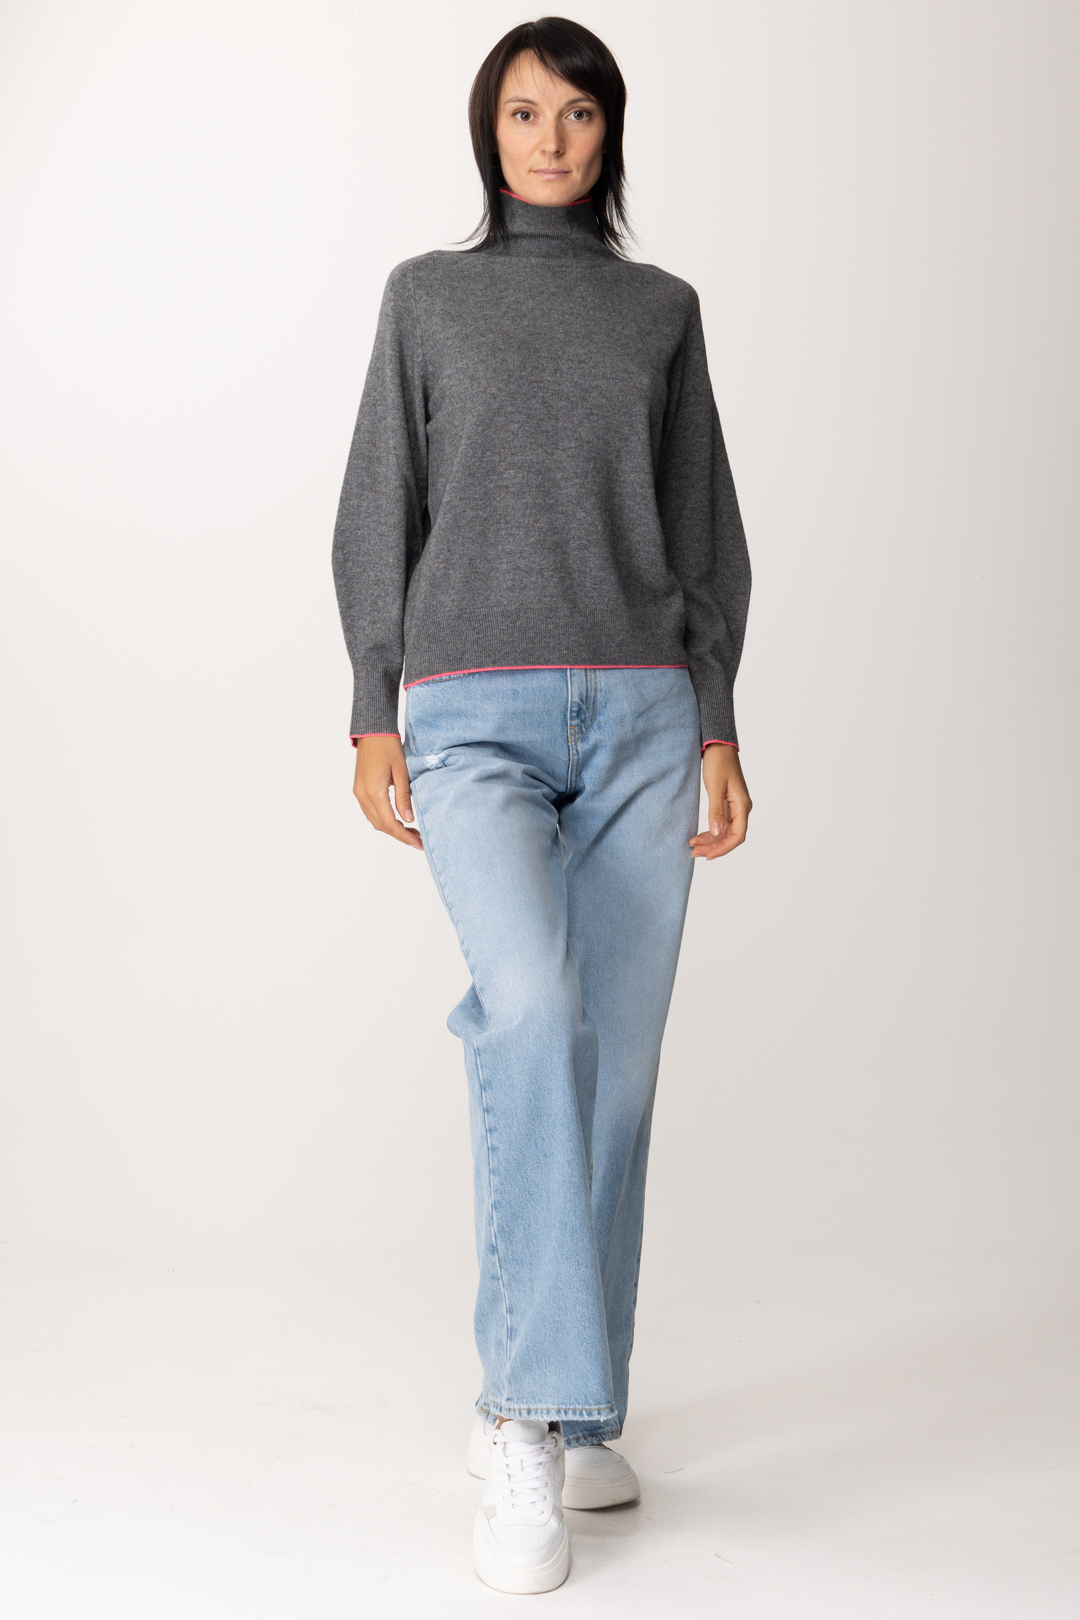 Preview: Pinko Turtleneck with contrasting profiles GRIGIO ROCCA